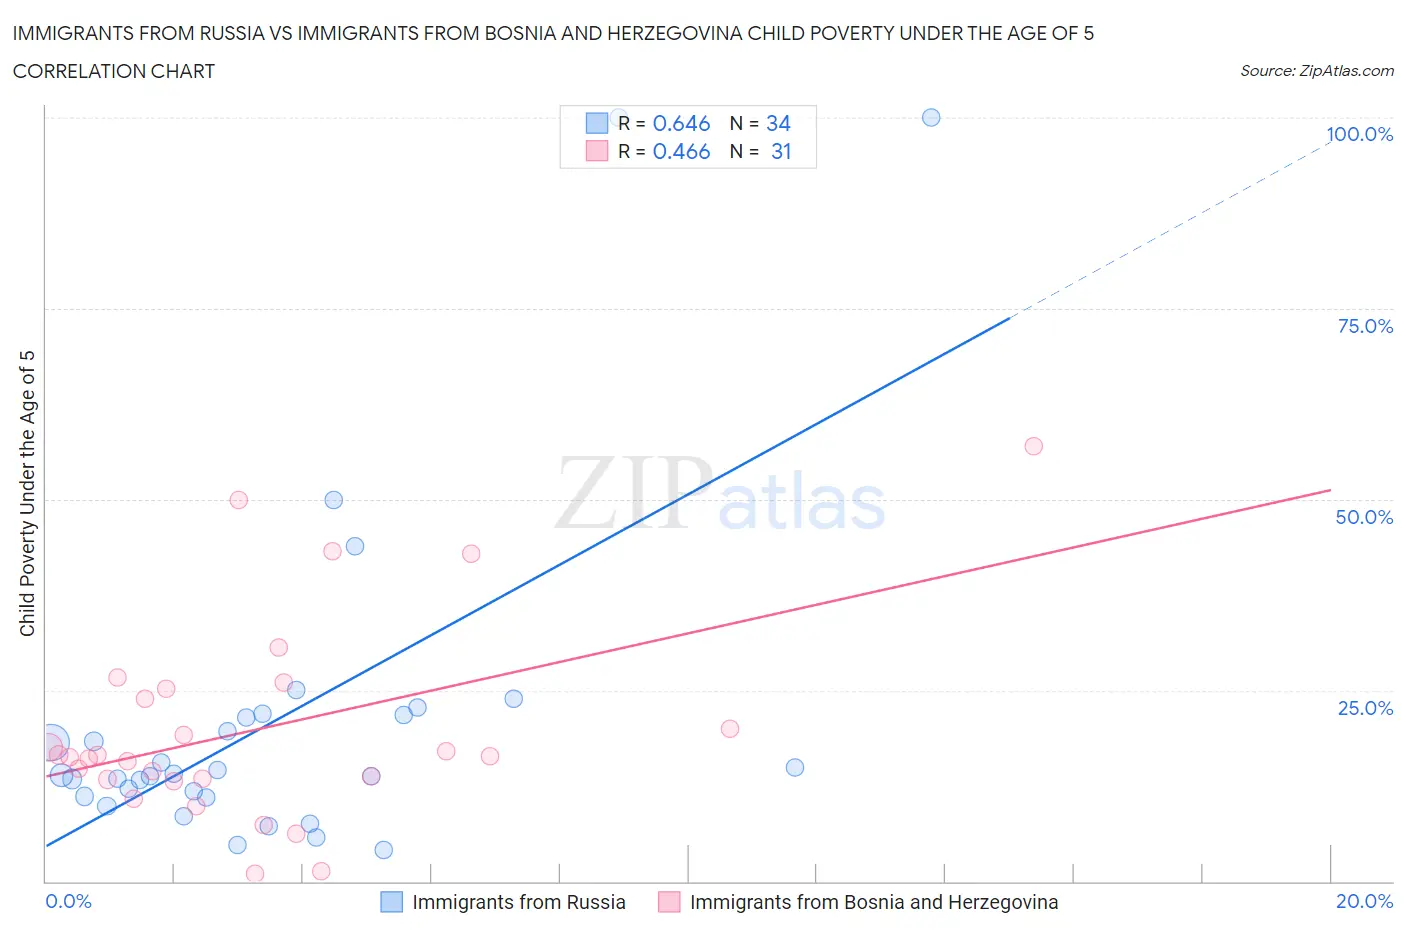 Immigrants from Russia vs Immigrants from Bosnia and Herzegovina Child Poverty Under the Age of 5